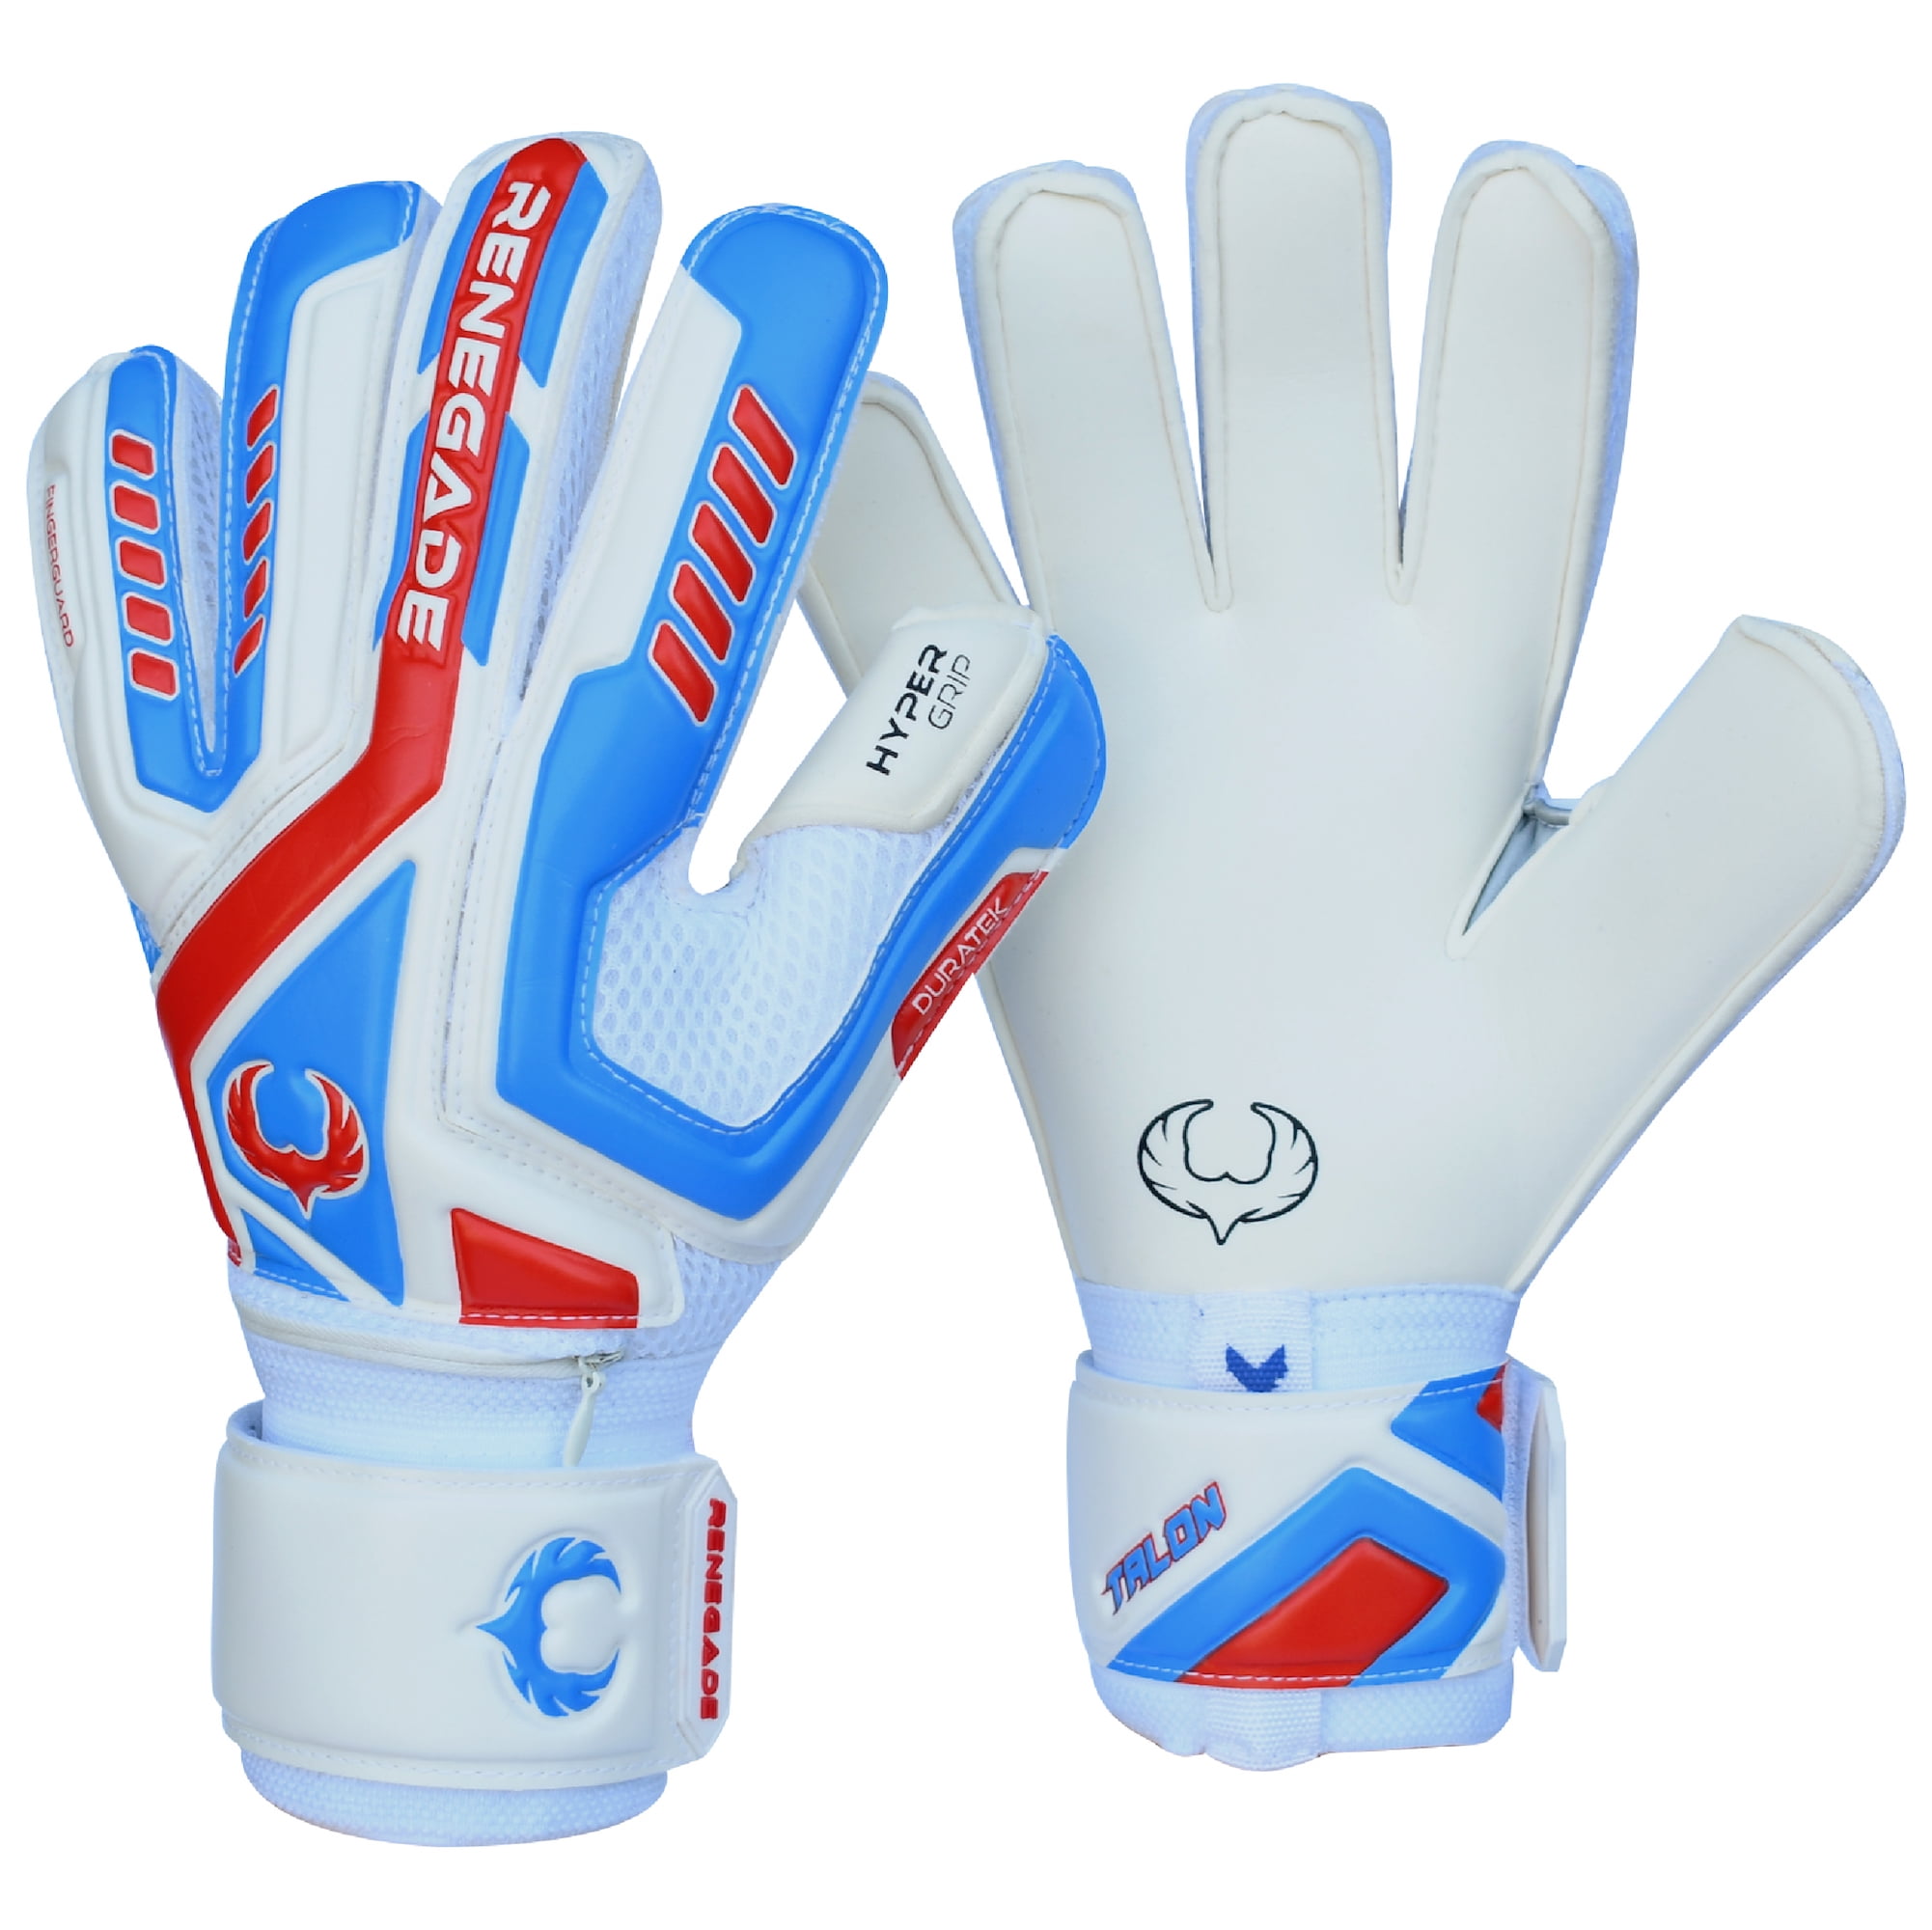 Blue Youth & Adult Goalie Goalkeeper Gloves with Strong Grip and Thick Latex Anti-Slip Protection Finger to Prevent Injury for All Ages/Levels Excellent Protection（Size 5-11）